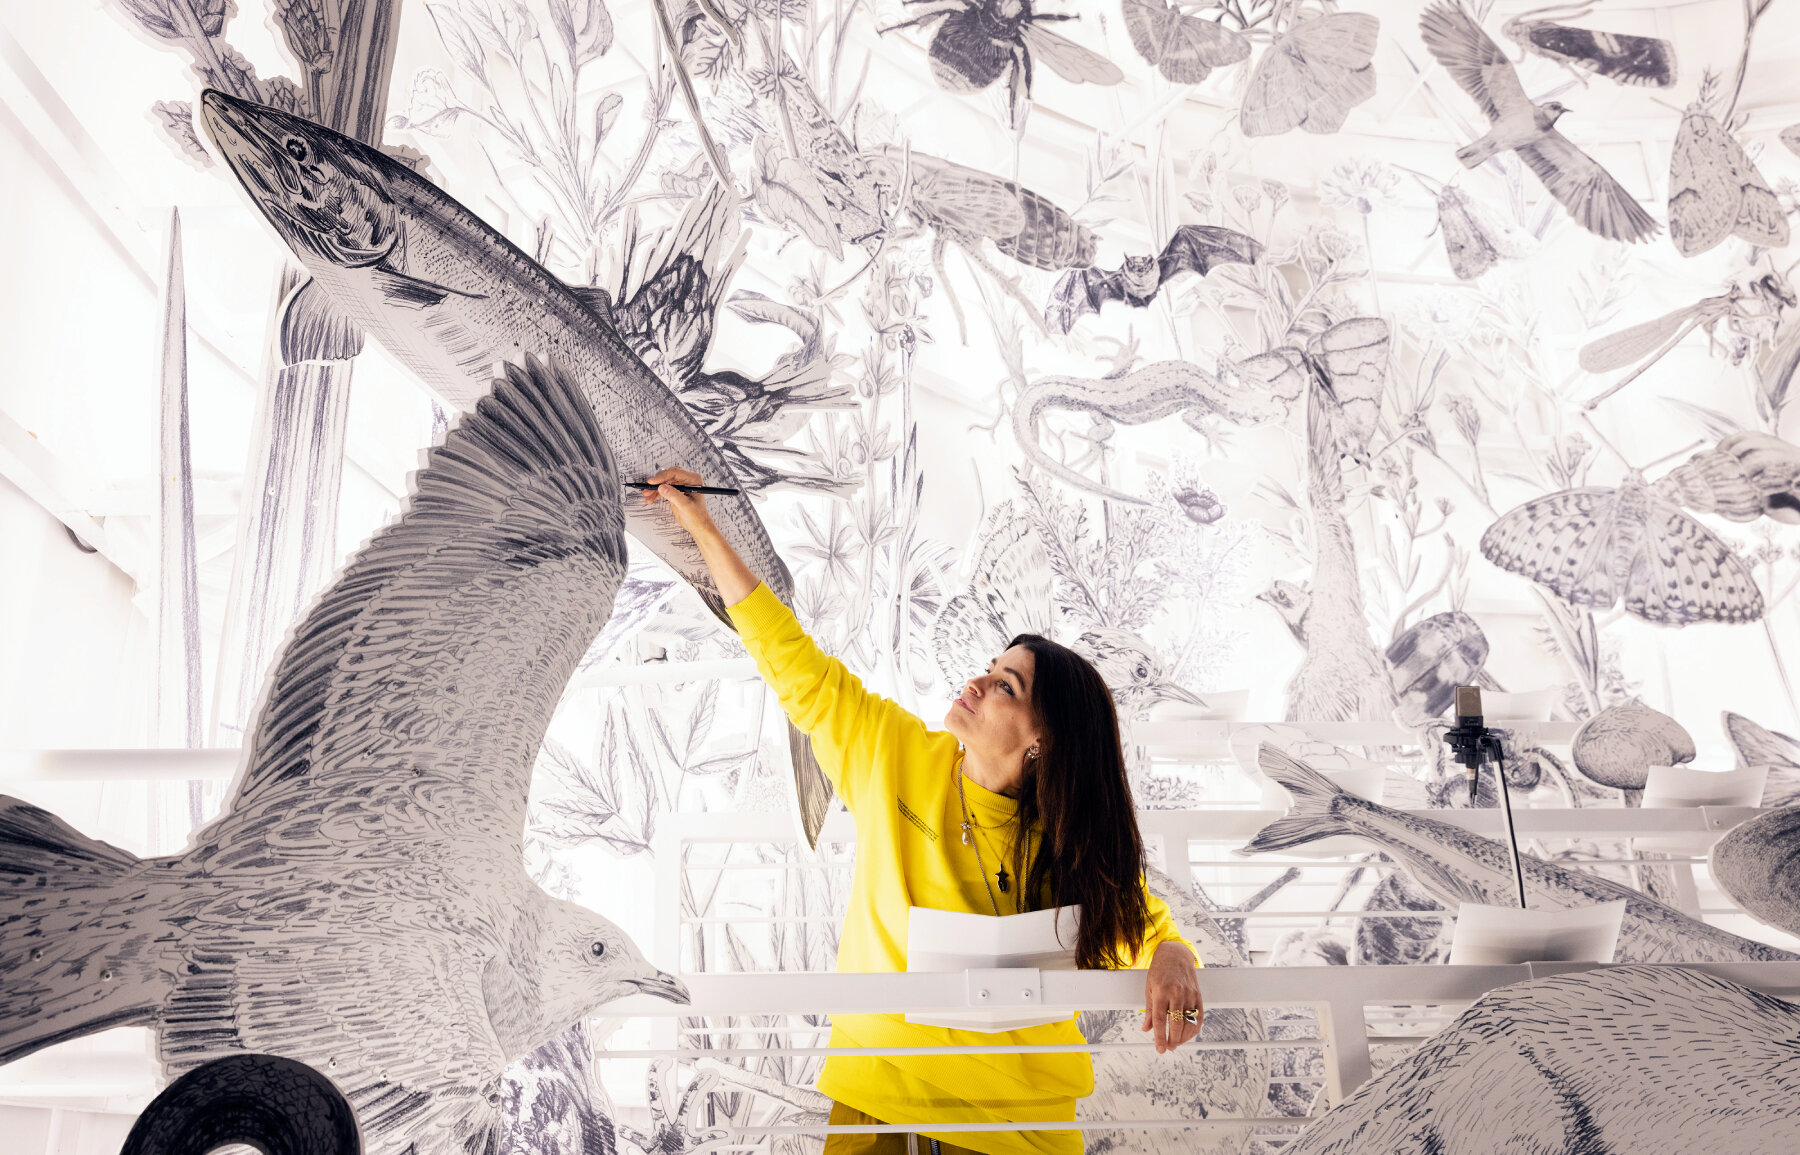 es devlin draws 243 endangered species for her illuminated dome 'come home  again